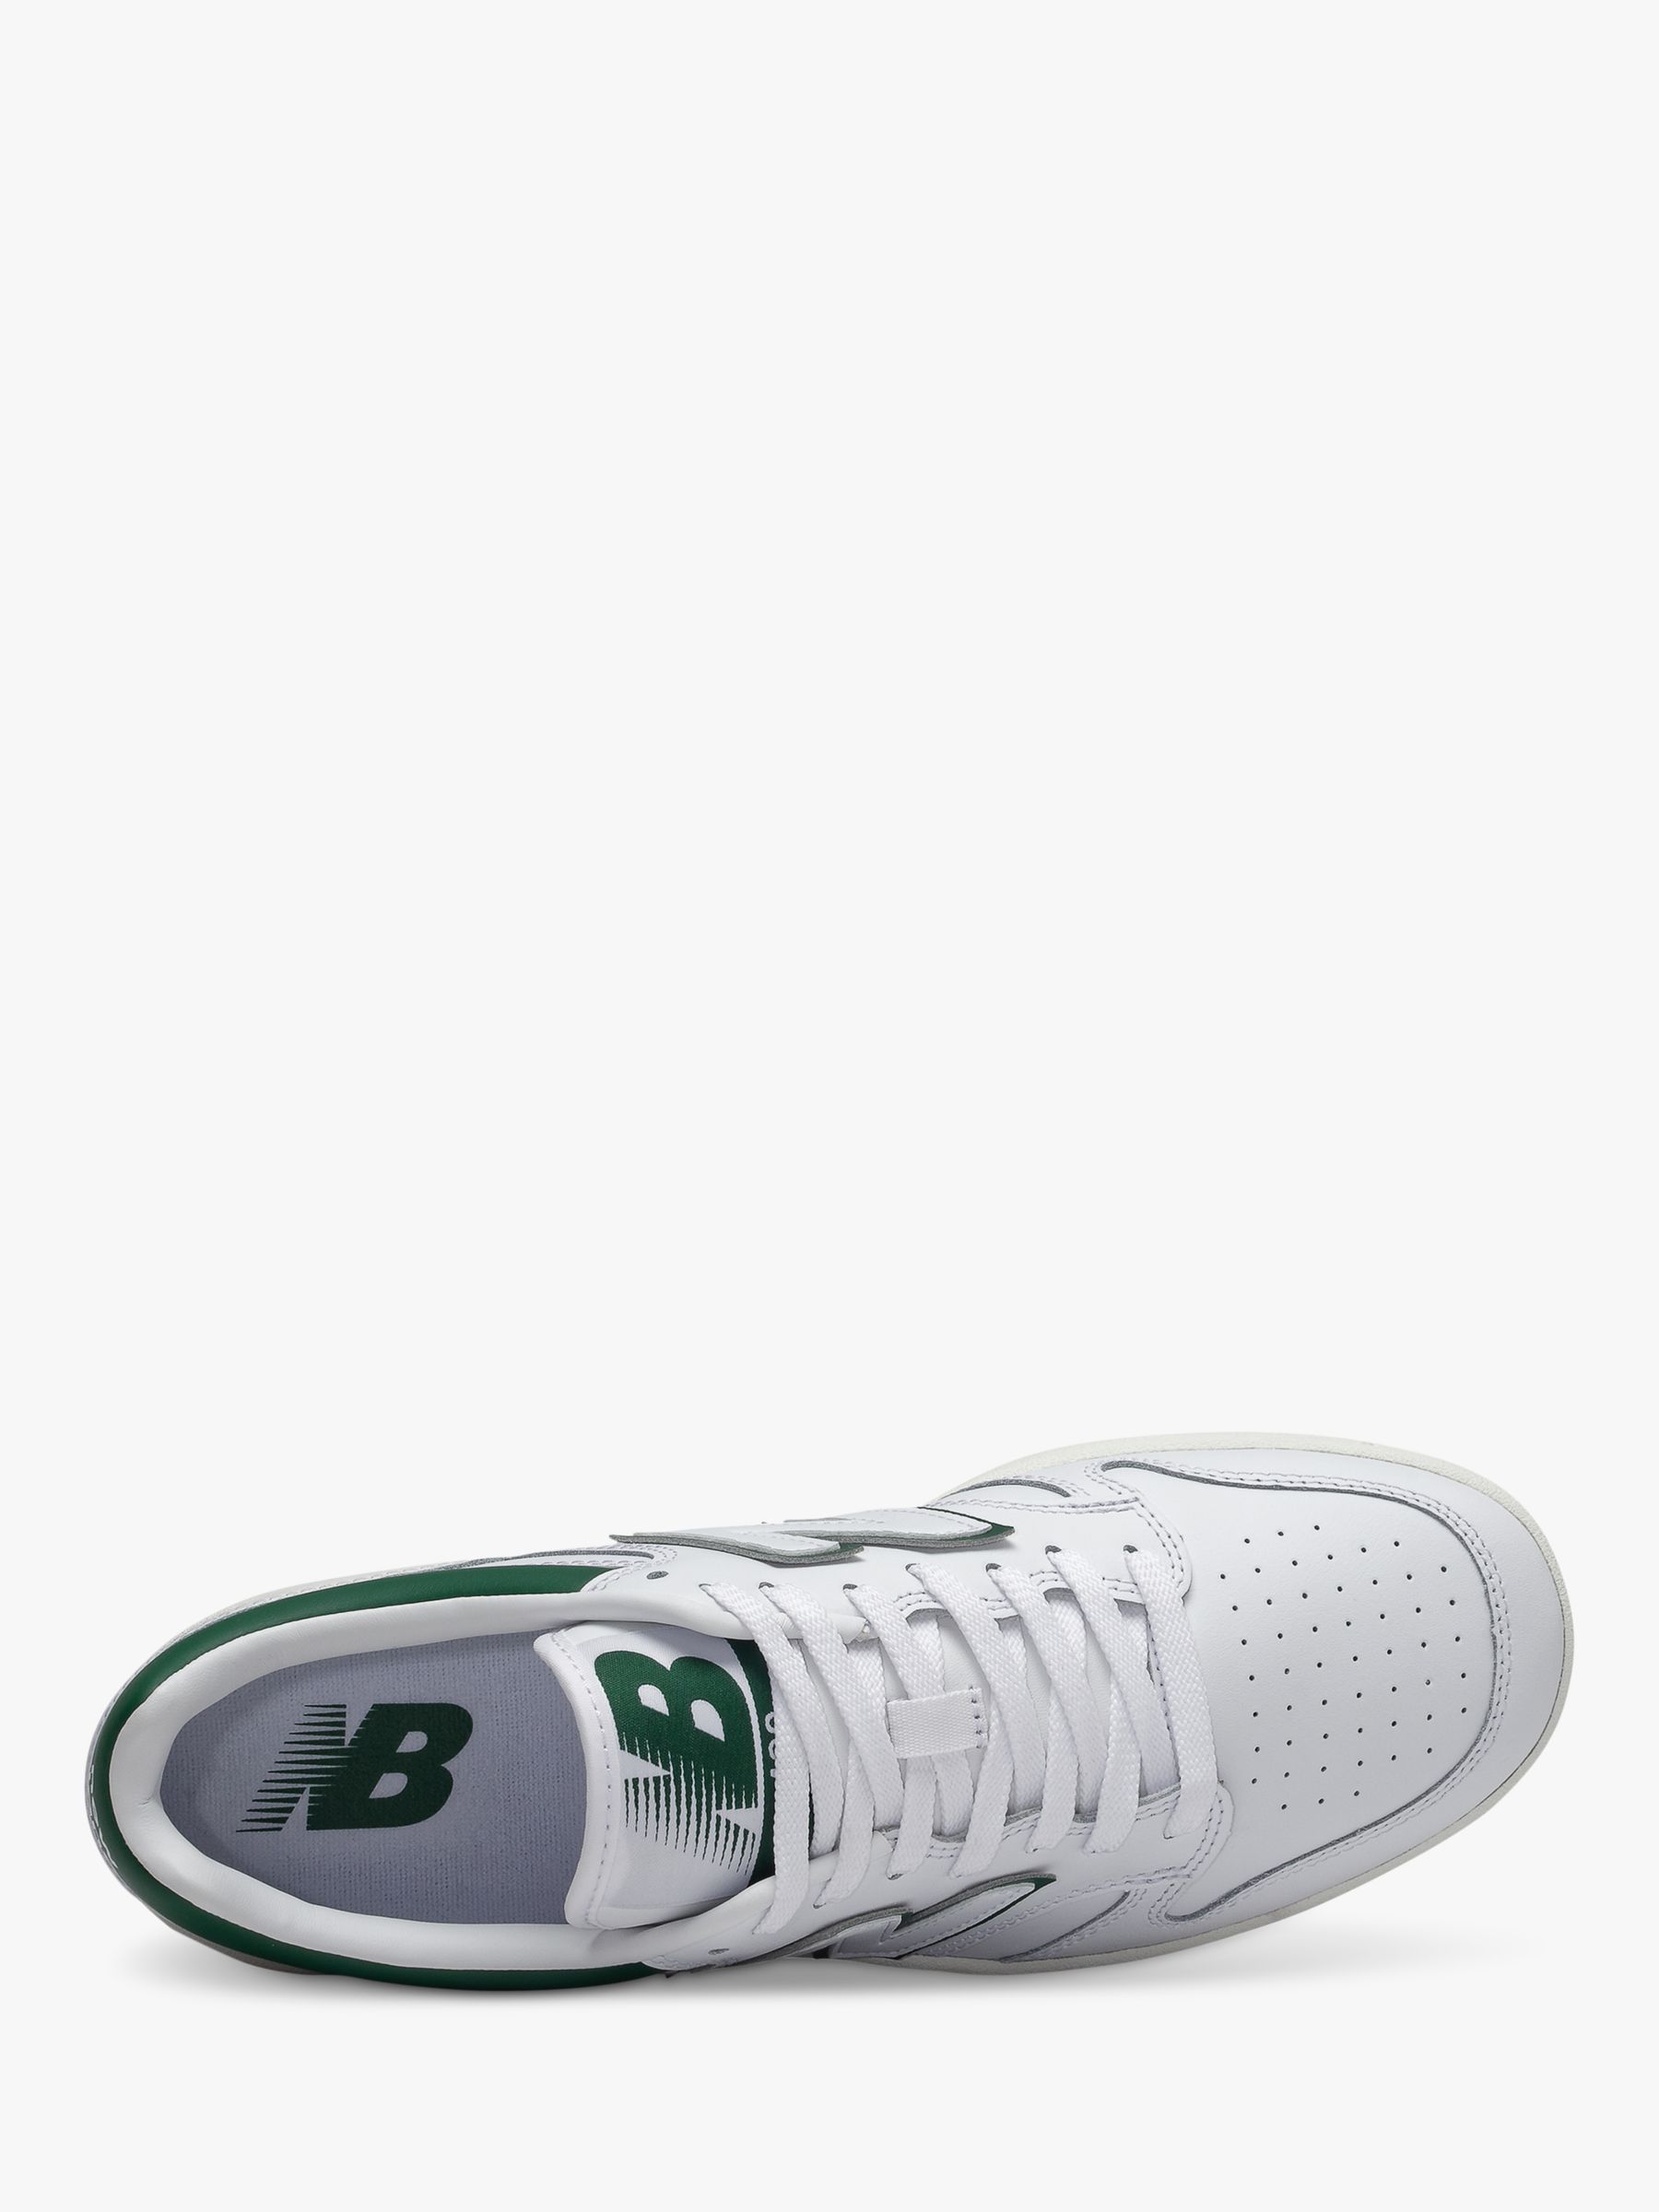 New Balance 480 Lace Up Trainers, White/Green, 10